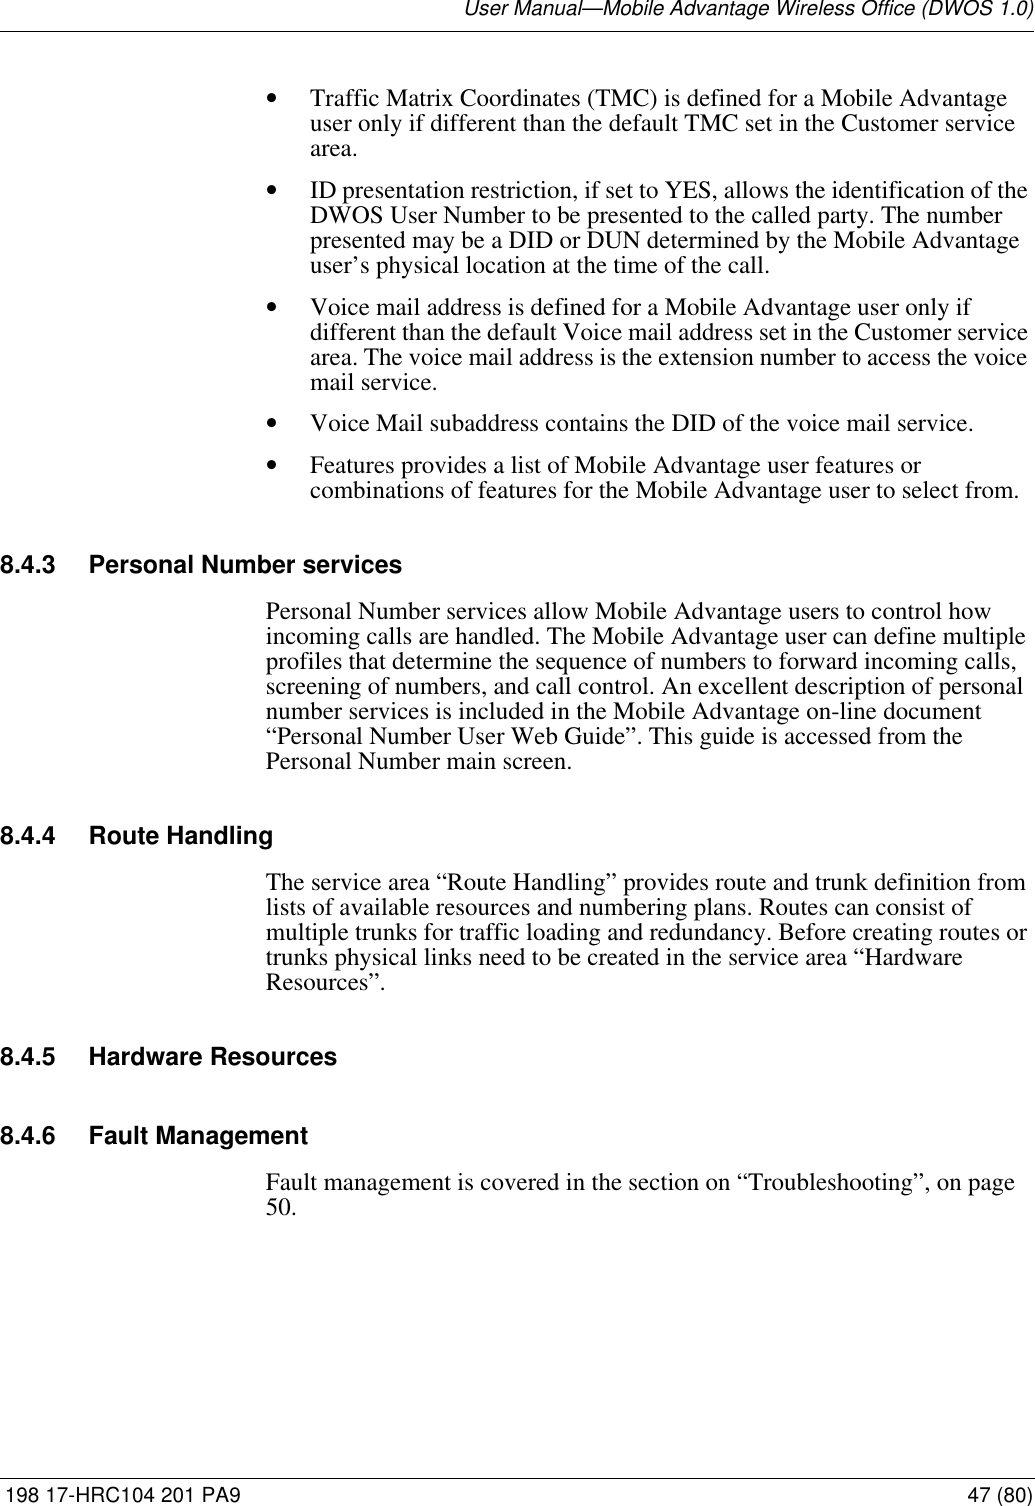 User Manual—Mobile Advantage Wireless Office (DWOS 1.0) 198 17-HRC104 201 PA9 47 (80)•Traffic Matrix Coordinates (TMC) is defined for a Mobile Advantage user only if different than the default TMC set in the Customer service area. •ID presentation restriction, if set to YES, allows the identification of the DWOS User Number to be presented to the called party. The number presented may be a DID or DUN determined by the Mobile Advantage user’s physical location at the time of the call.•Voice mail address is defined for a Mobile Advantage user only if different than the default Voice mail address set in the Customer service area. The voice mail address is the extension number to access the voice mail service.•Voice Mail subaddress contains the DID of the voice mail service. •Features provides a list of Mobile Advantage user features or combinations of features for the Mobile Advantage user to select from.8.4.3 Personal Number servicesPersonal Number services allow Mobile Advantage users to control how incoming calls are handled. The Mobile Advantage user can define multiple profiles that determine the sequence of numbers to forward incoming calls, screening of numbers, and call control. An excellent description of personal number services is included in the Mobile Advantage on-line document “Personal Number User Web Guide”. This guide is accessed from the Personal Number main screen.8.4.4 Route HandlingThe service area “Route Handling” provides route and trunk definition from lists of available resources and numbering plans. Routes can consist of multiple trunks for traffic loading and redundancy. Before creating routes or trunks physical links need to be created in the service area “Hardware Resources”.8.4.5 Hardware Resources 8.4.6 Fault ManagementFault management is covered in the section on “Troubleshooting”, on page 50.